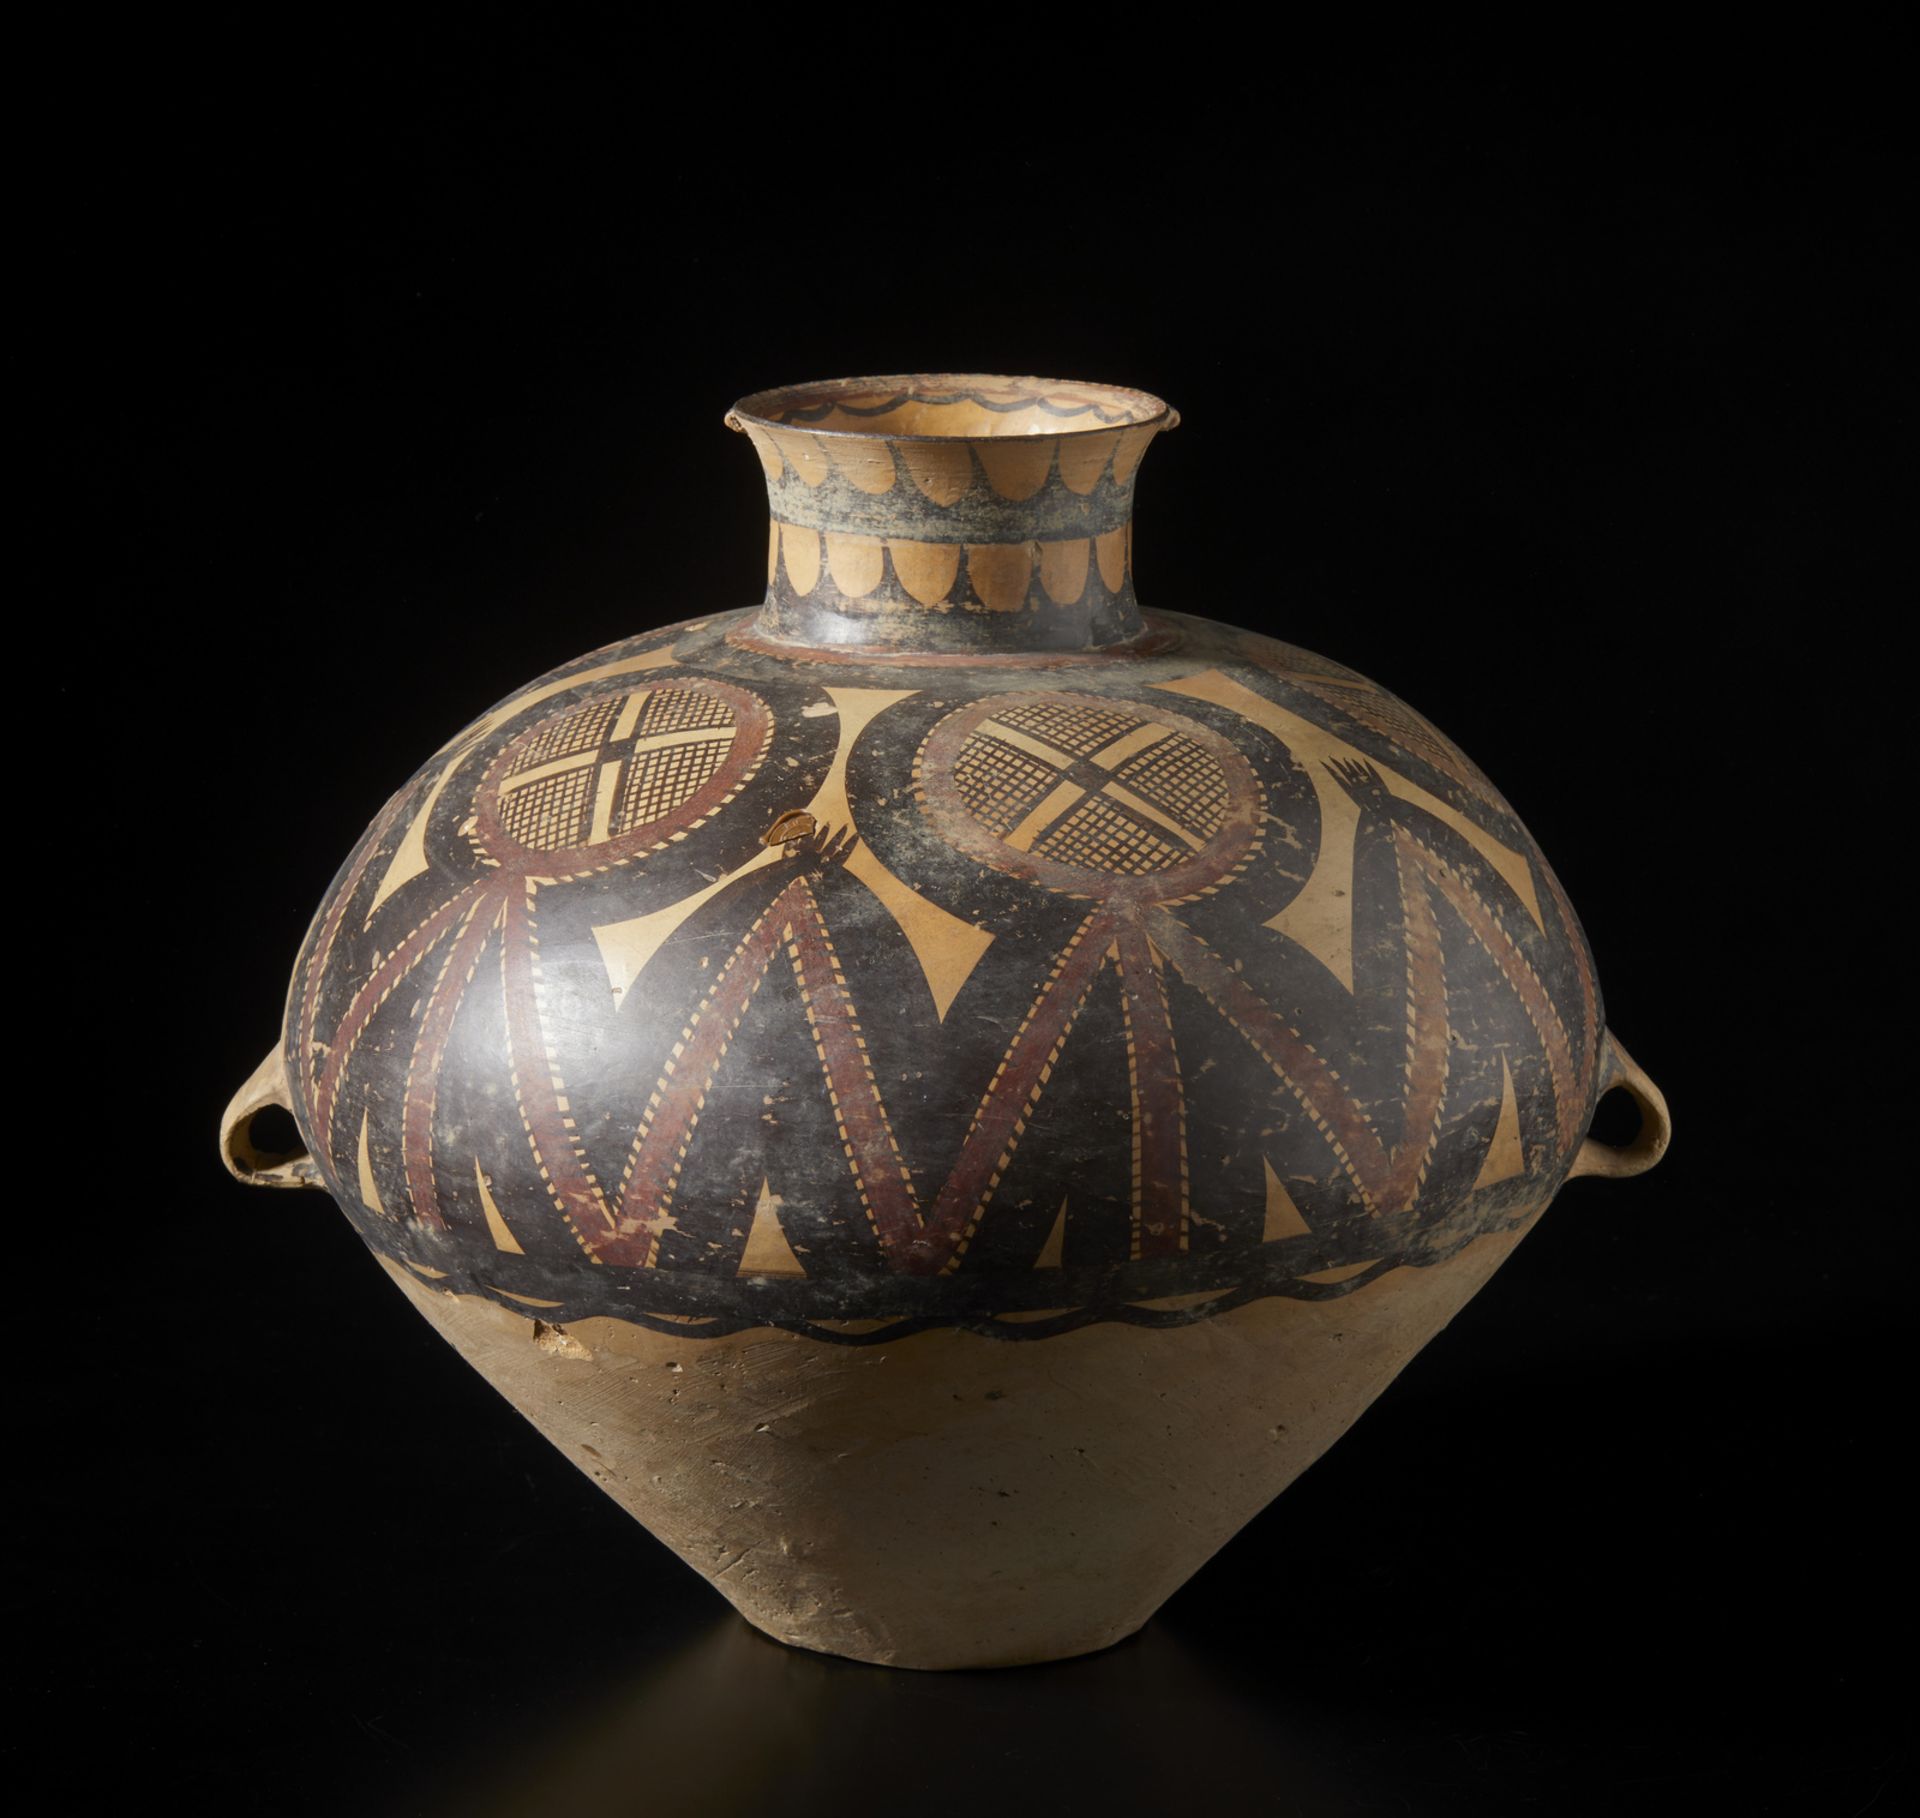 A terracotta jar with abstract and geometric decoration China, Neolithic period Cm 38,00 x 34,00